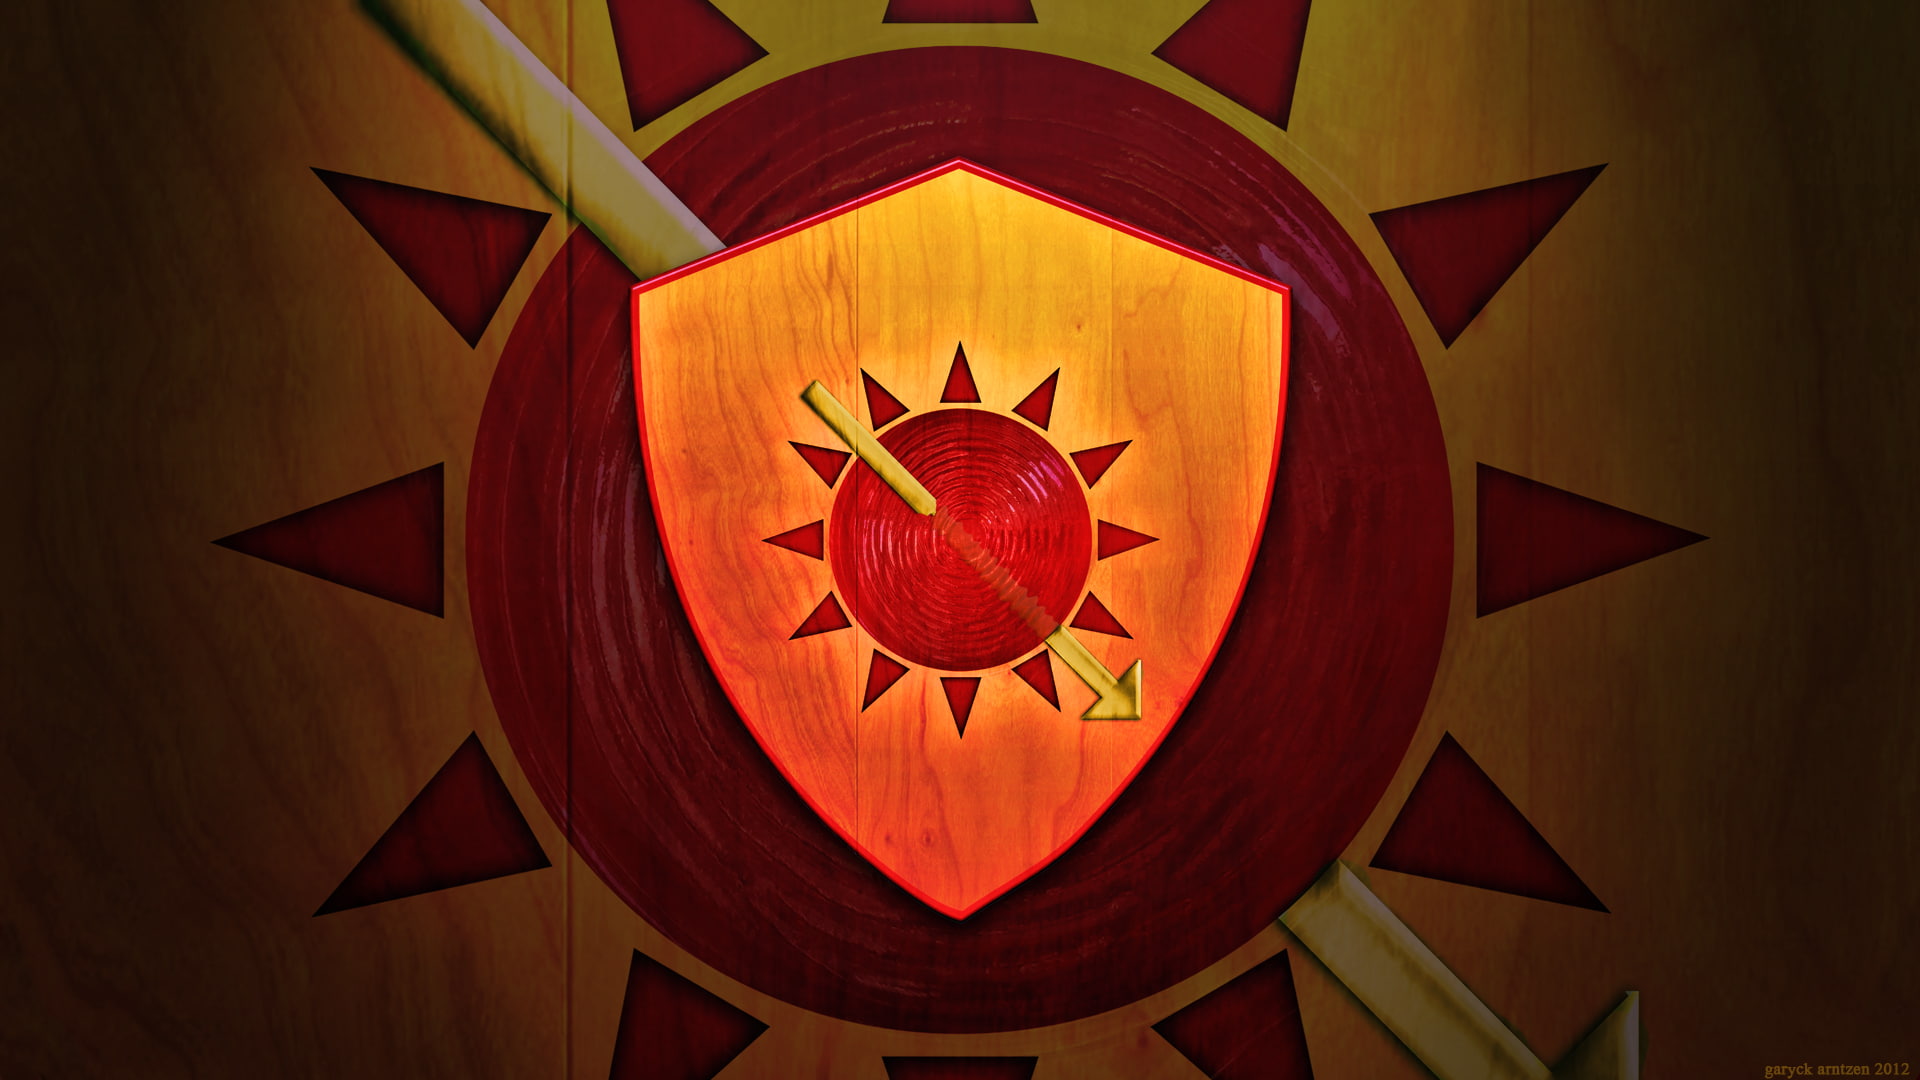 orange and red knight shield vector art, the sun, book, spear